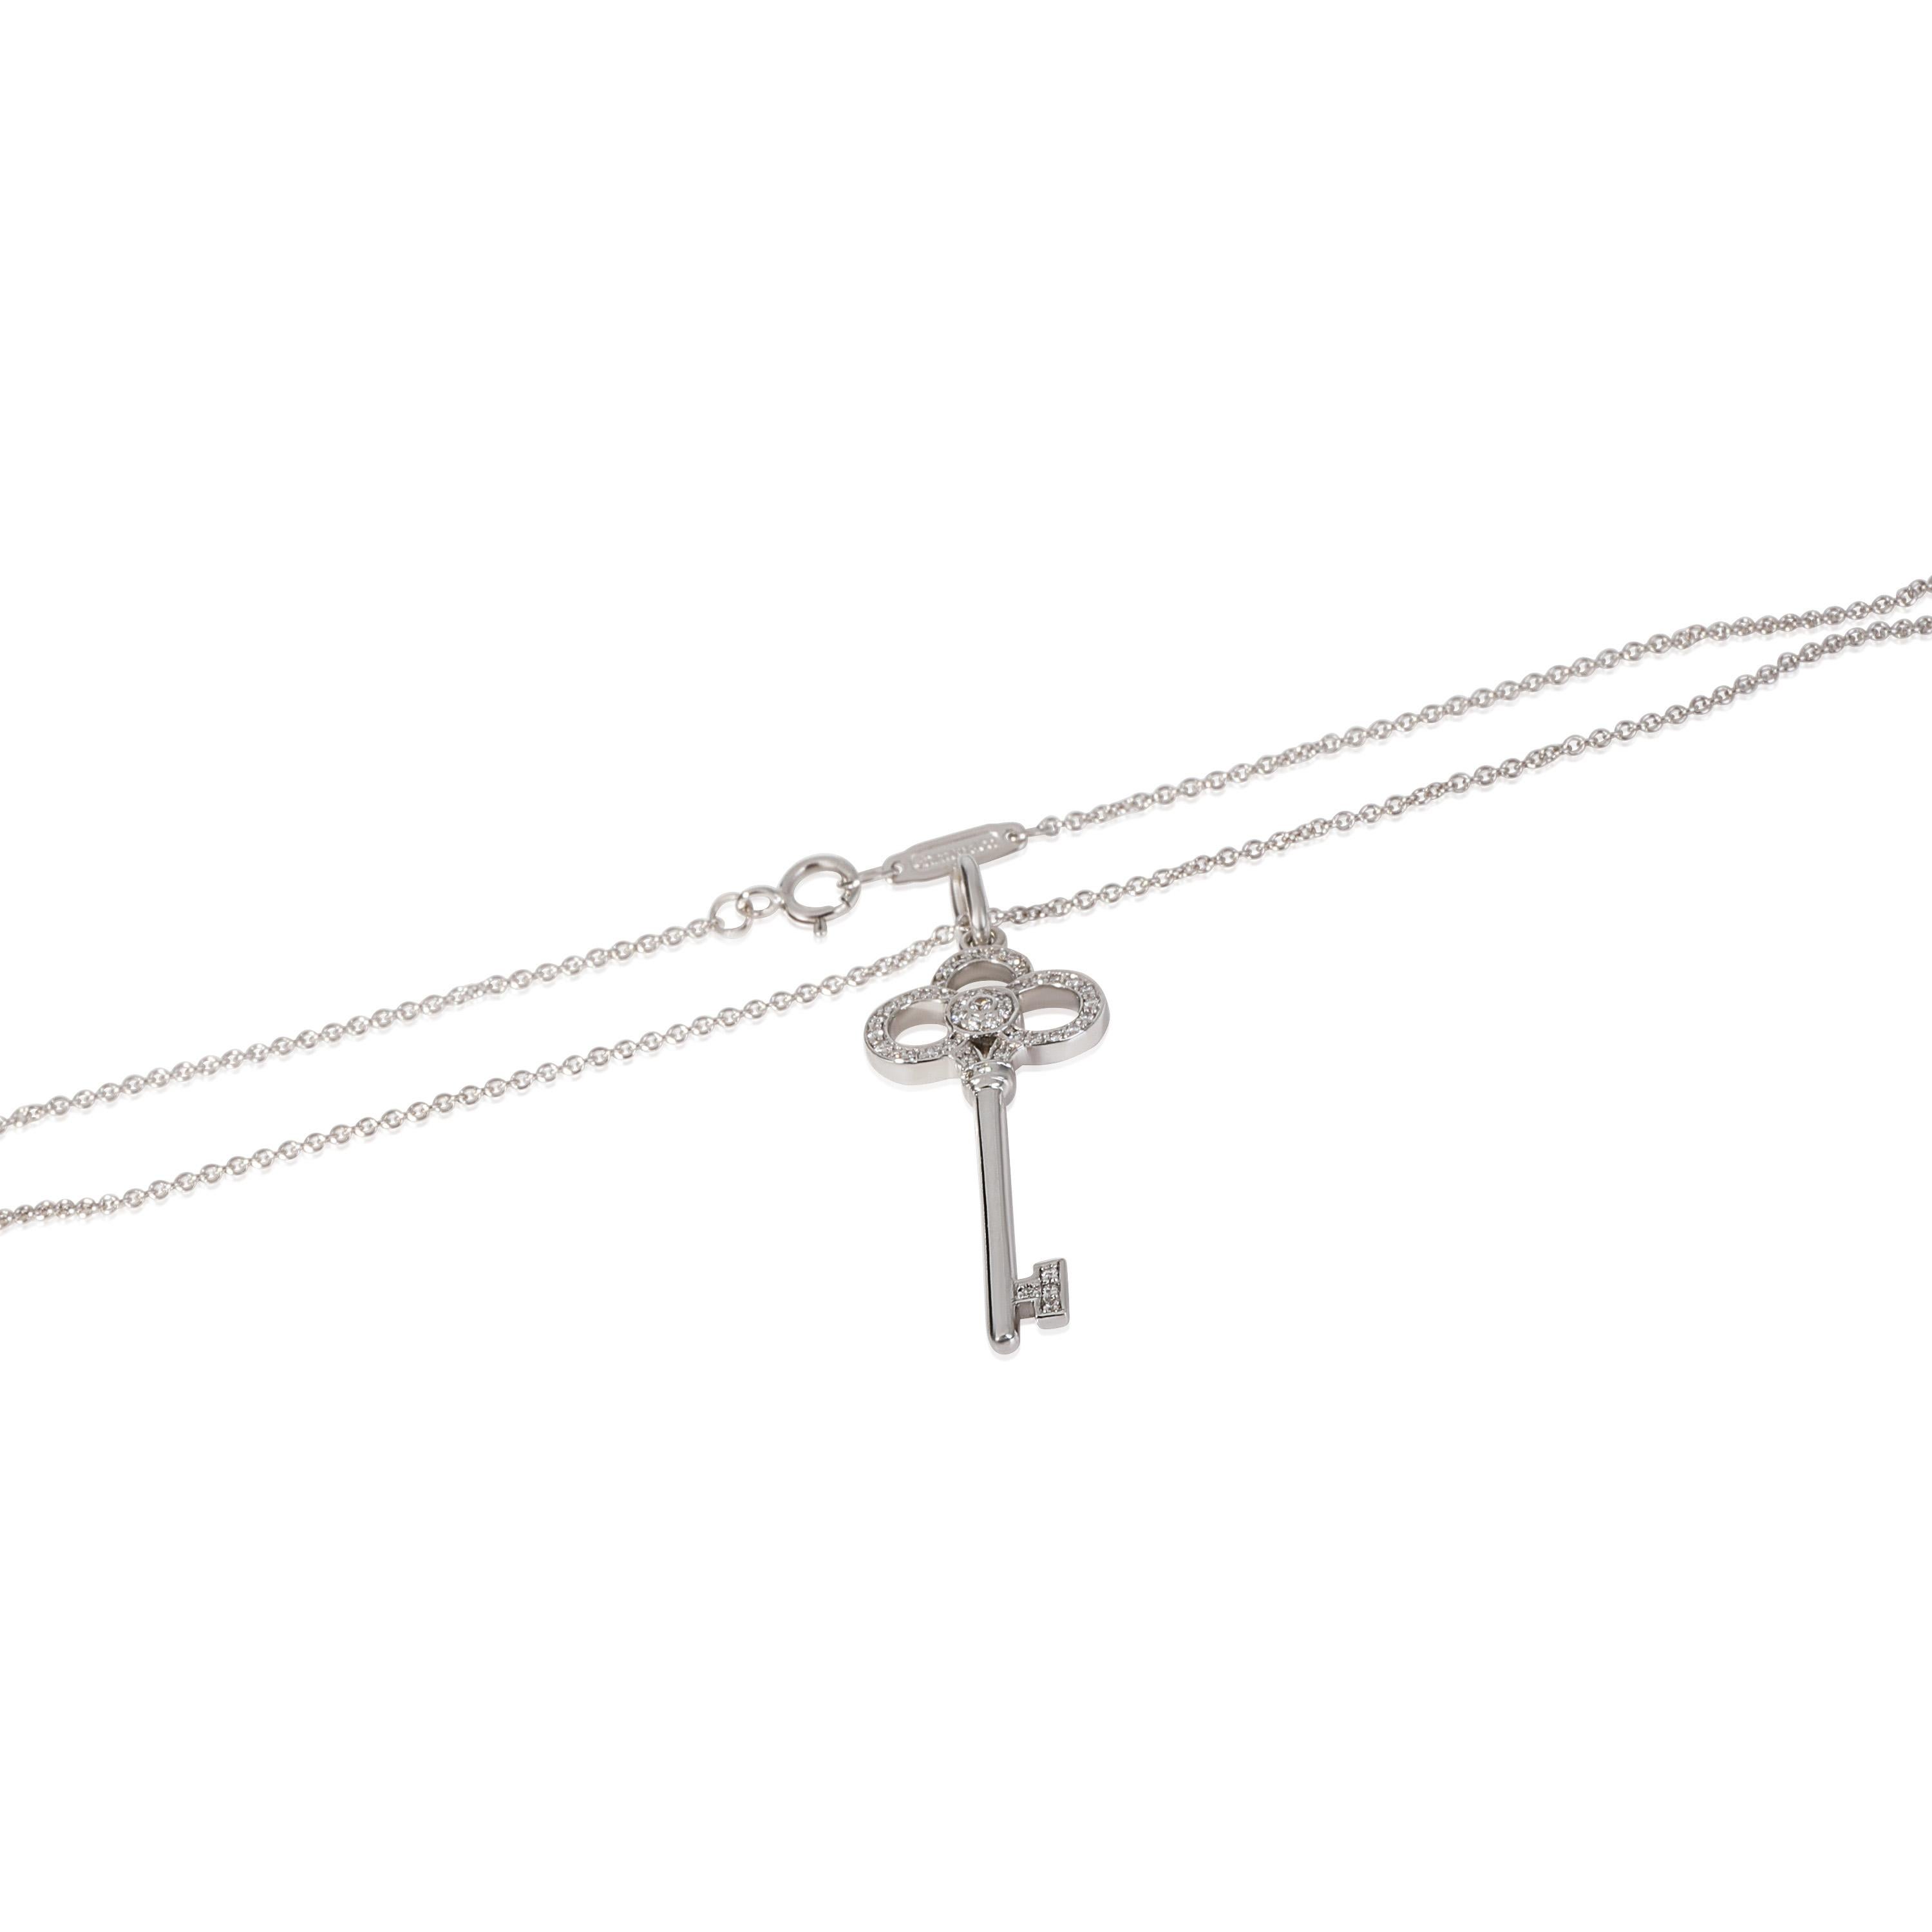 Tiffany & Co. Keys Diamond Pendant in 18k White Gold 0.06 CTW

PRIMARY DETAILS
SKU: 114095
Listing Title: Tiffany & Co. Keys Diamond Pendant in 18k White Gold 0.06 CTW
Condition Description: Retails for 3535 USD. Length of pendant is 1.5 inches.